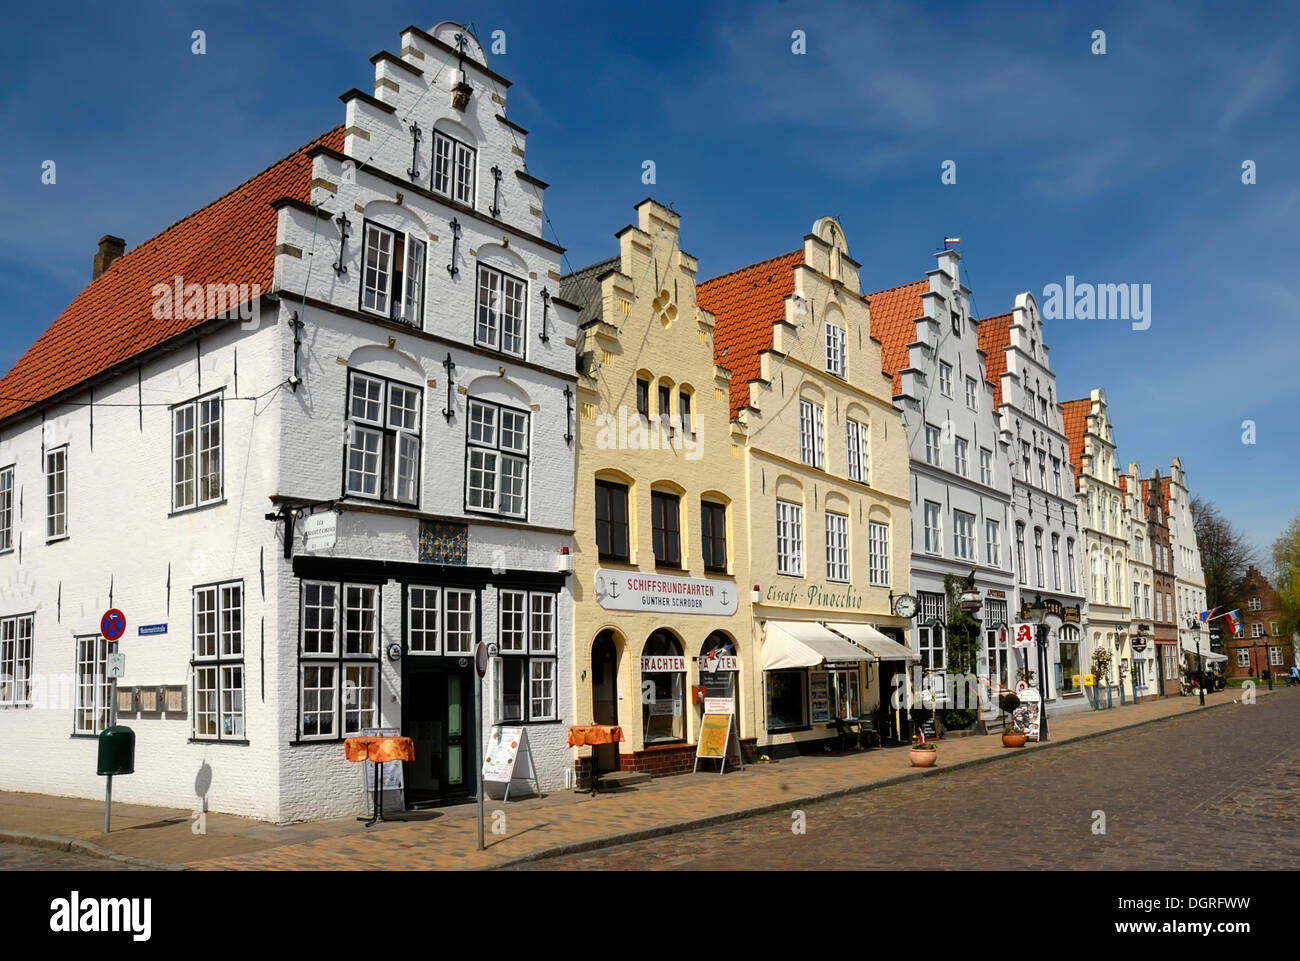 Wilhelminian-style buildings in the market square of the 'Dutch Town' of Friedrichstadt, North Friesland district Stock Photo